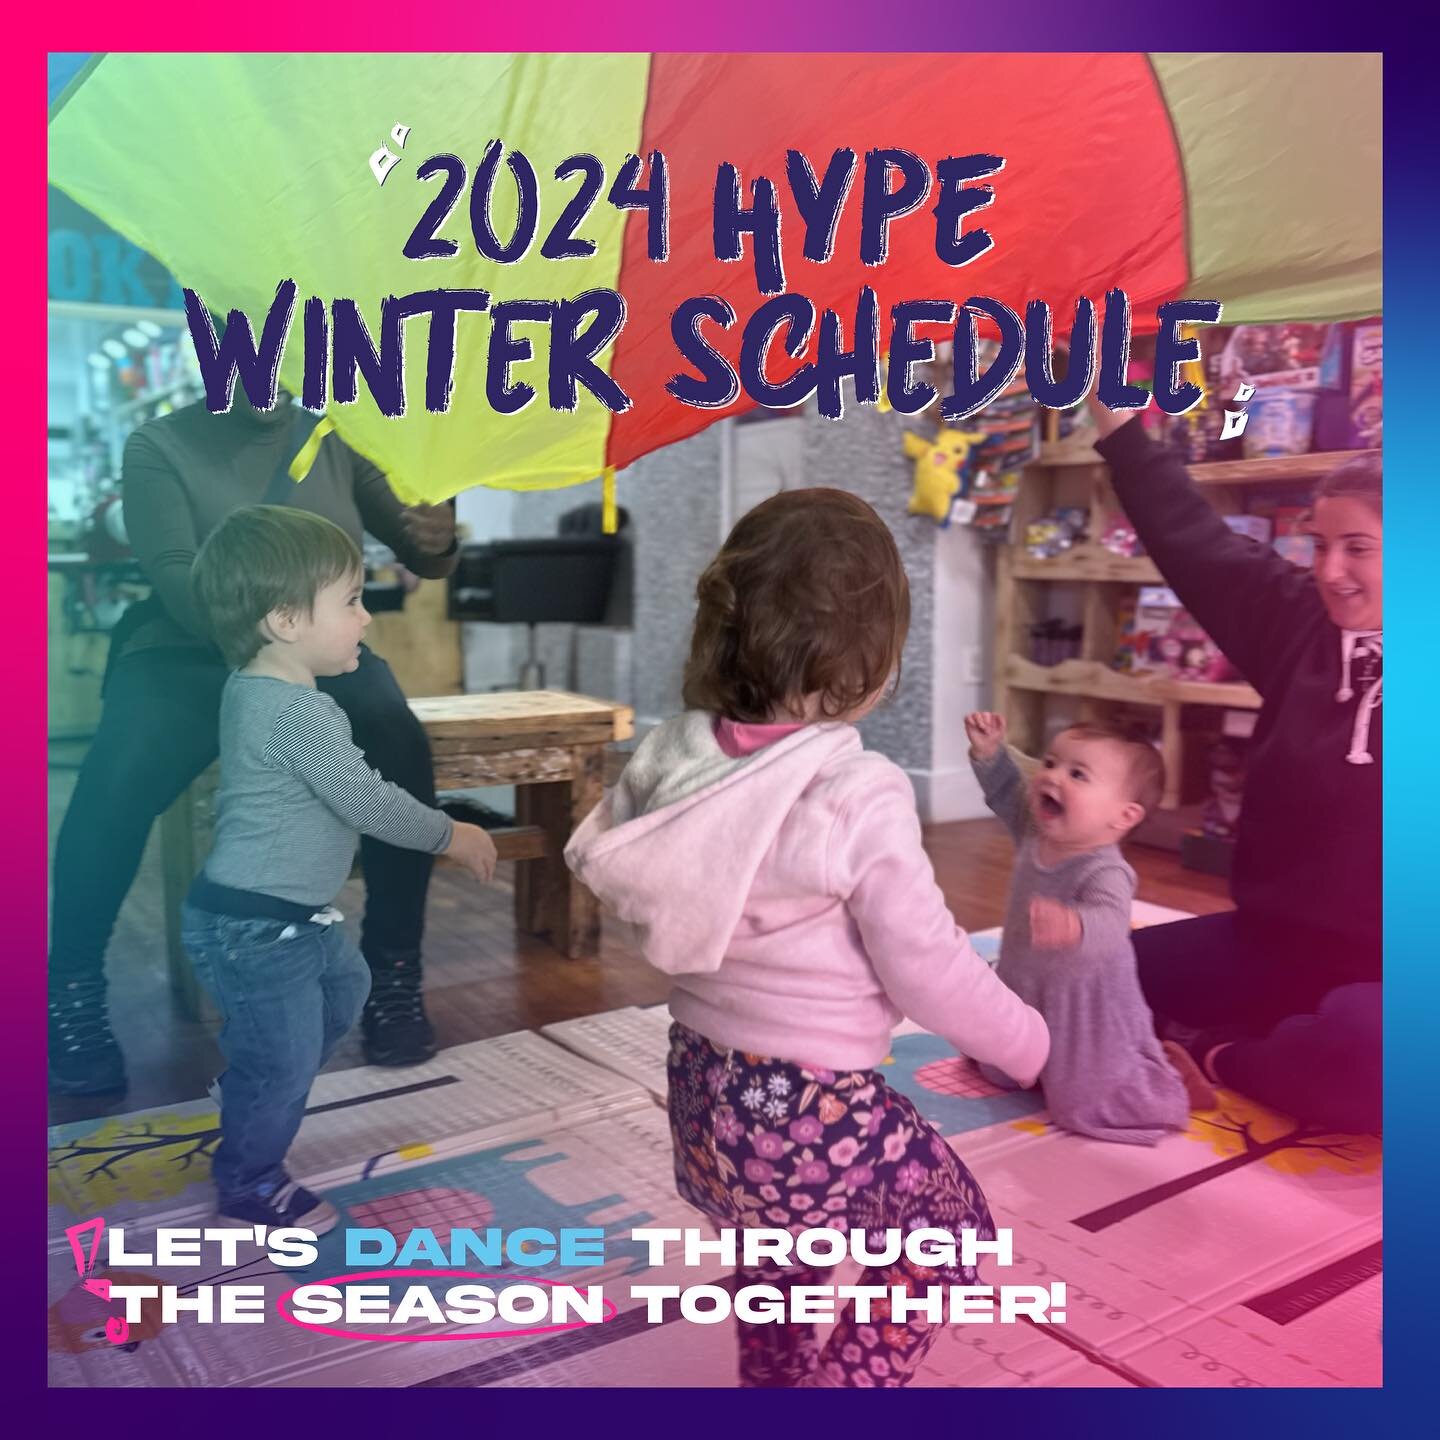 2024 WINTER HYPE SCHEDULE IS HERE!!! ❄️☃️🌨️⛸️

We are so insanely HYPE to be partnering with 2 AMAZING schools in our community (yes @ps8pta &amp;&nbsp;@brooklyn_compass that's you!!!)&nbsp; We cannot wait to spread the magic of dance to these Brook